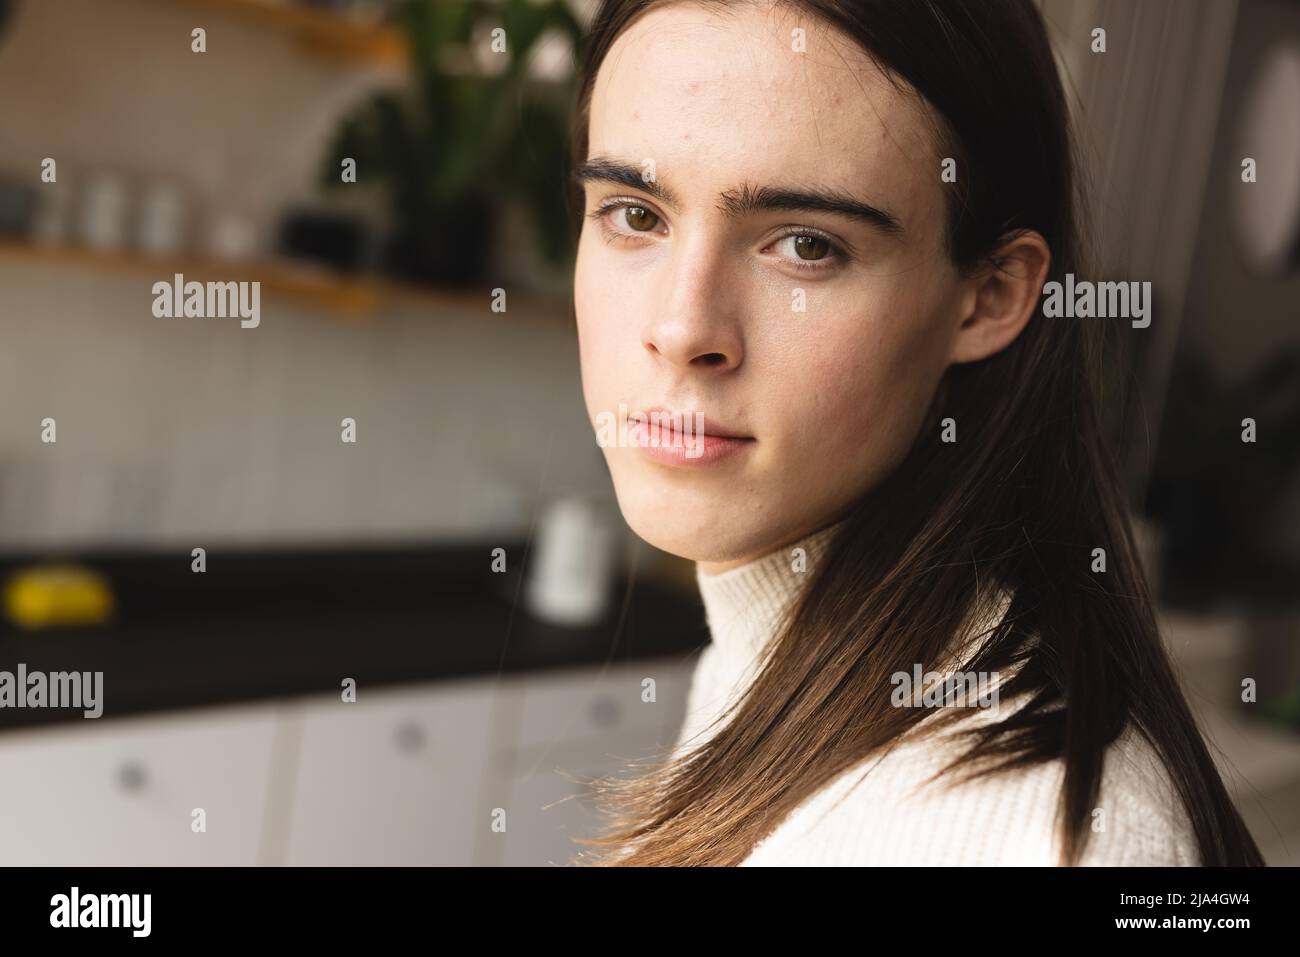 Close up portrait of non-binary trans woman in the kitchen at home Stock Photo